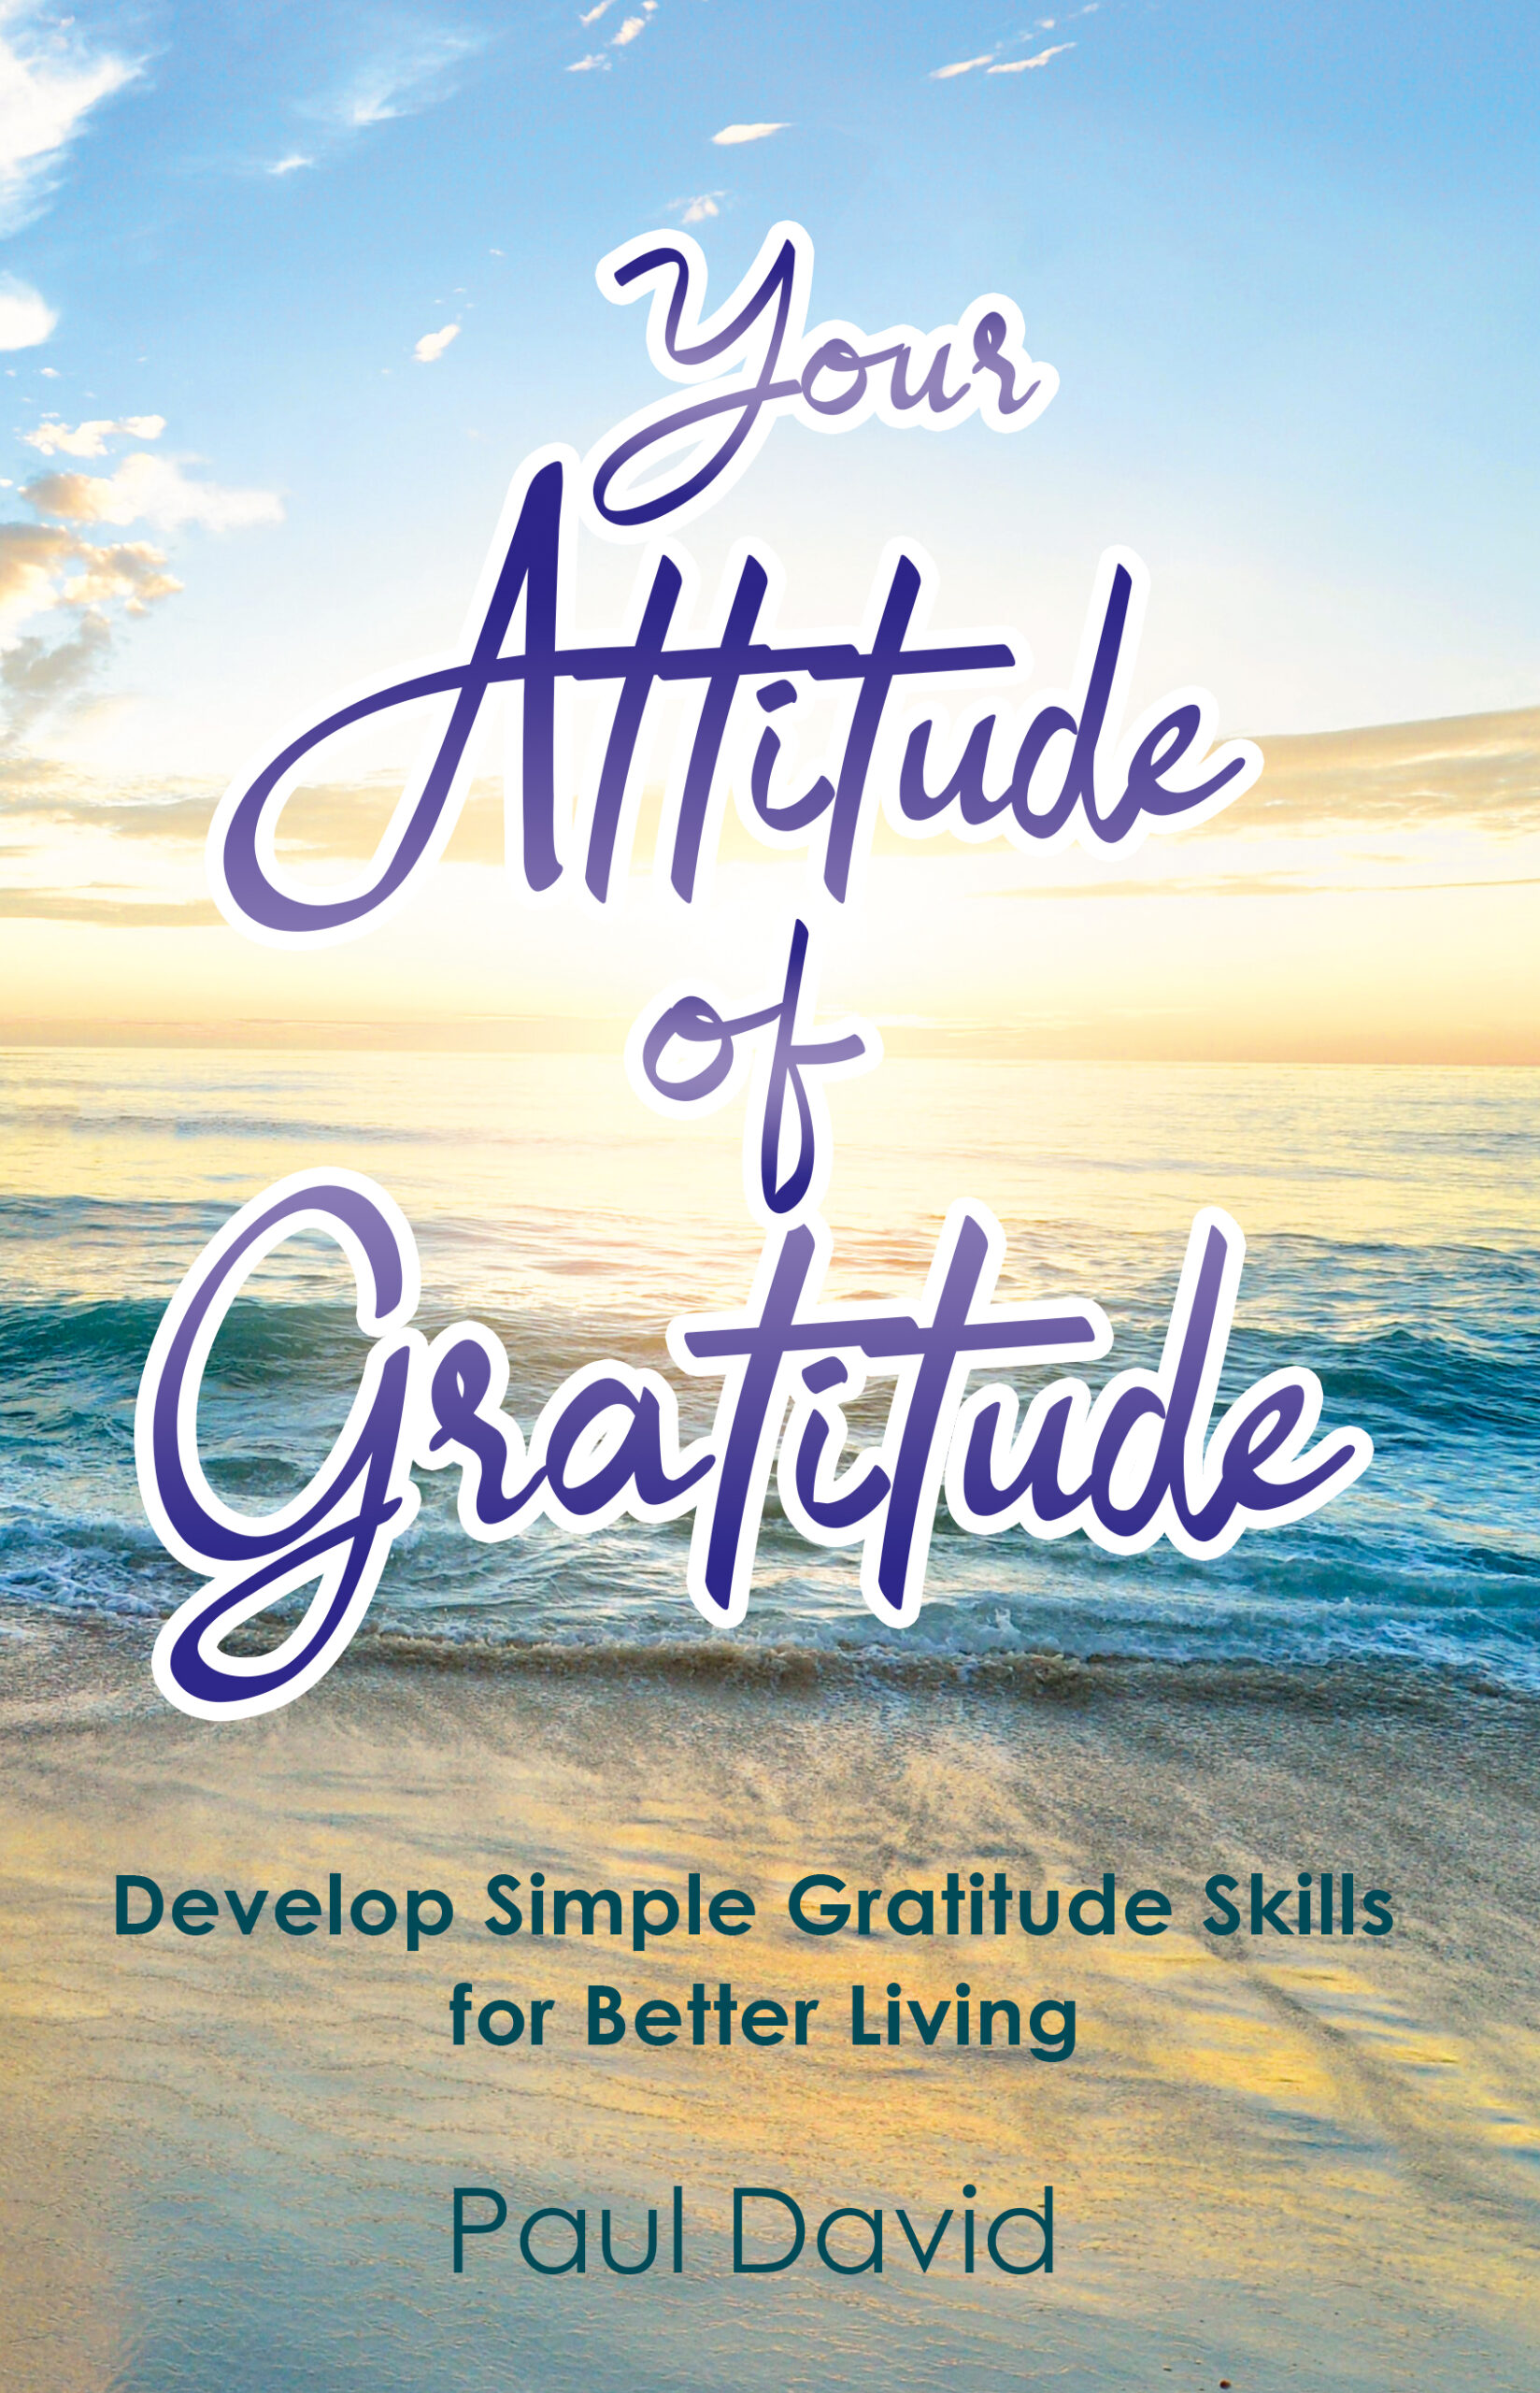 FREE: Your Attitude of Gratitude.  Develop Simple Gratitude Skills For Better Living by Paul David